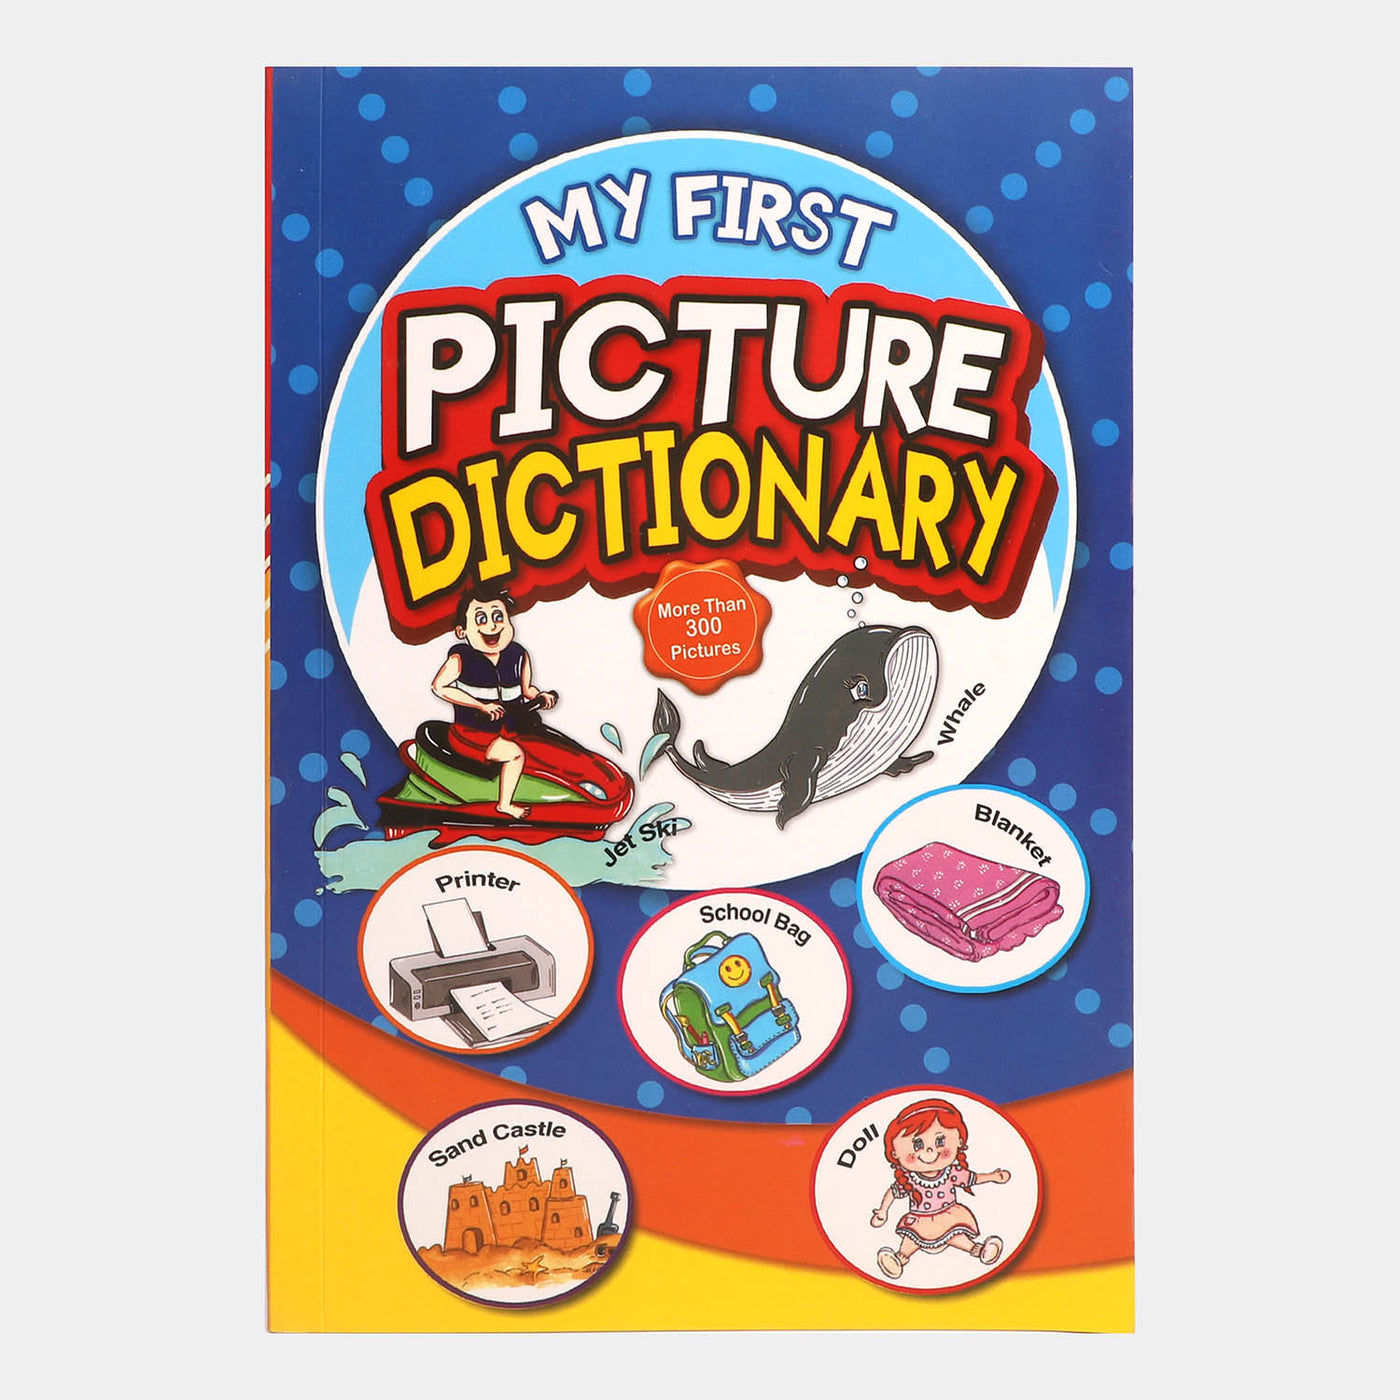 My first new picture dictionary